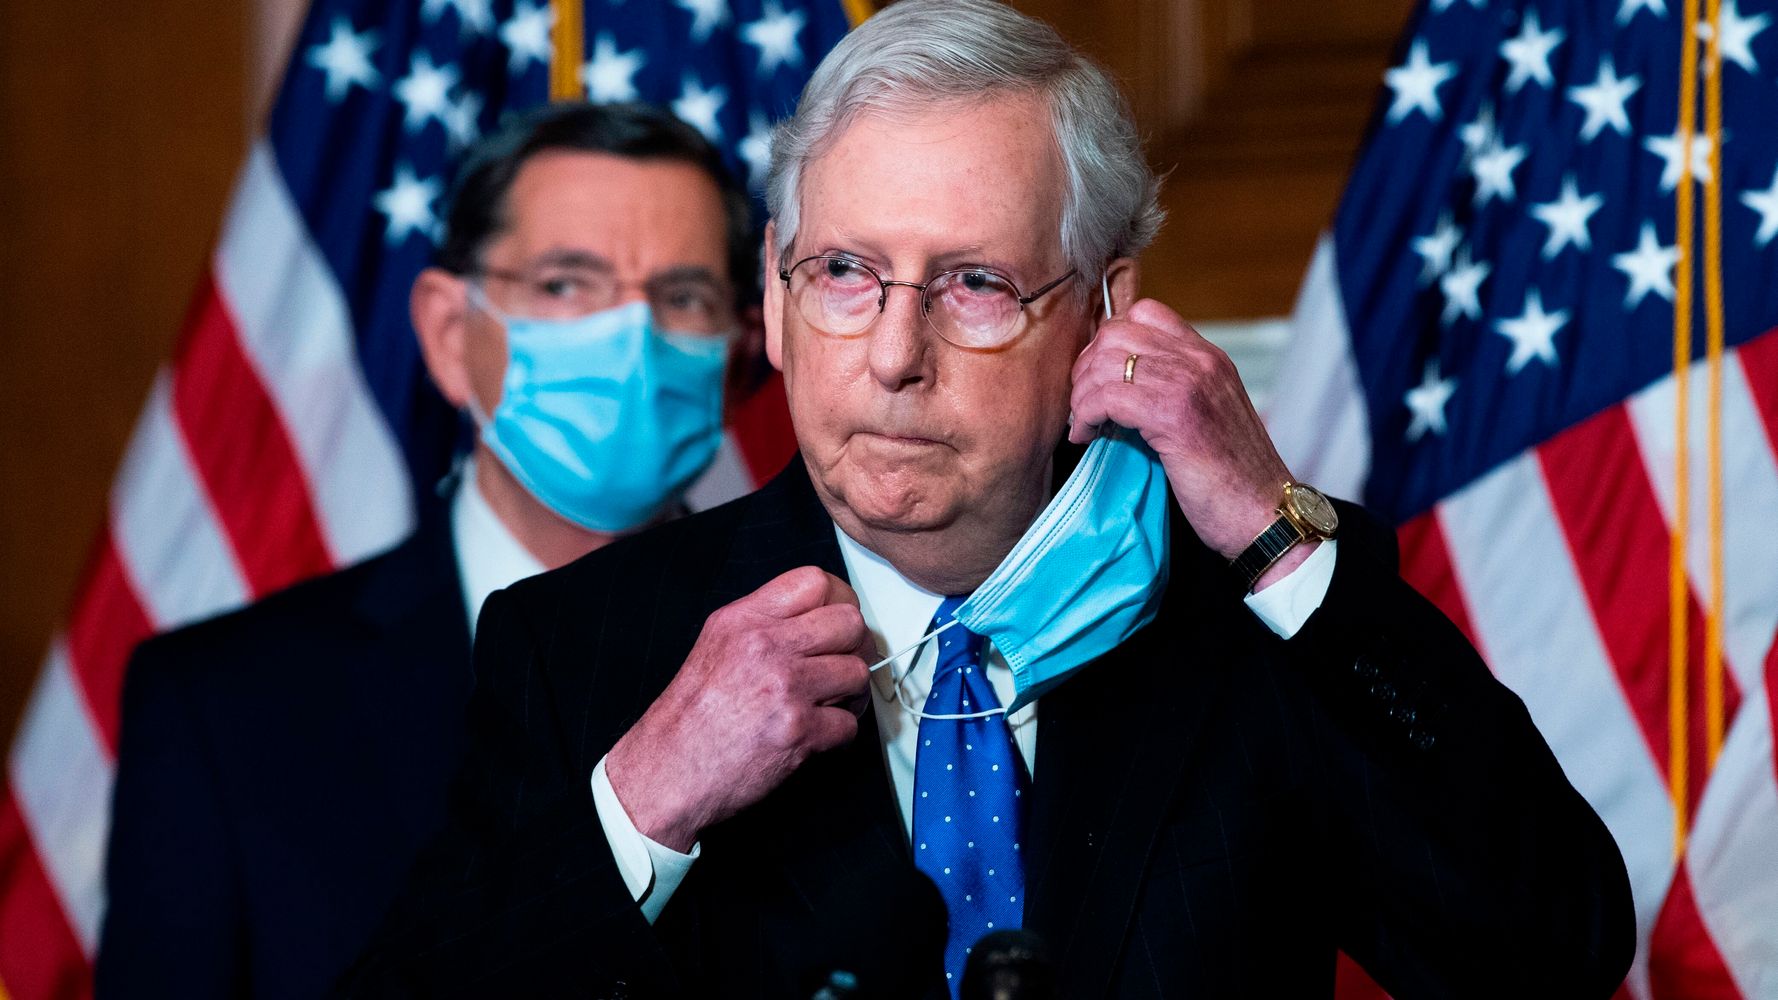 Mitch McConnell’s Liability Shield Is Major Holdup For COVID-19 Deal